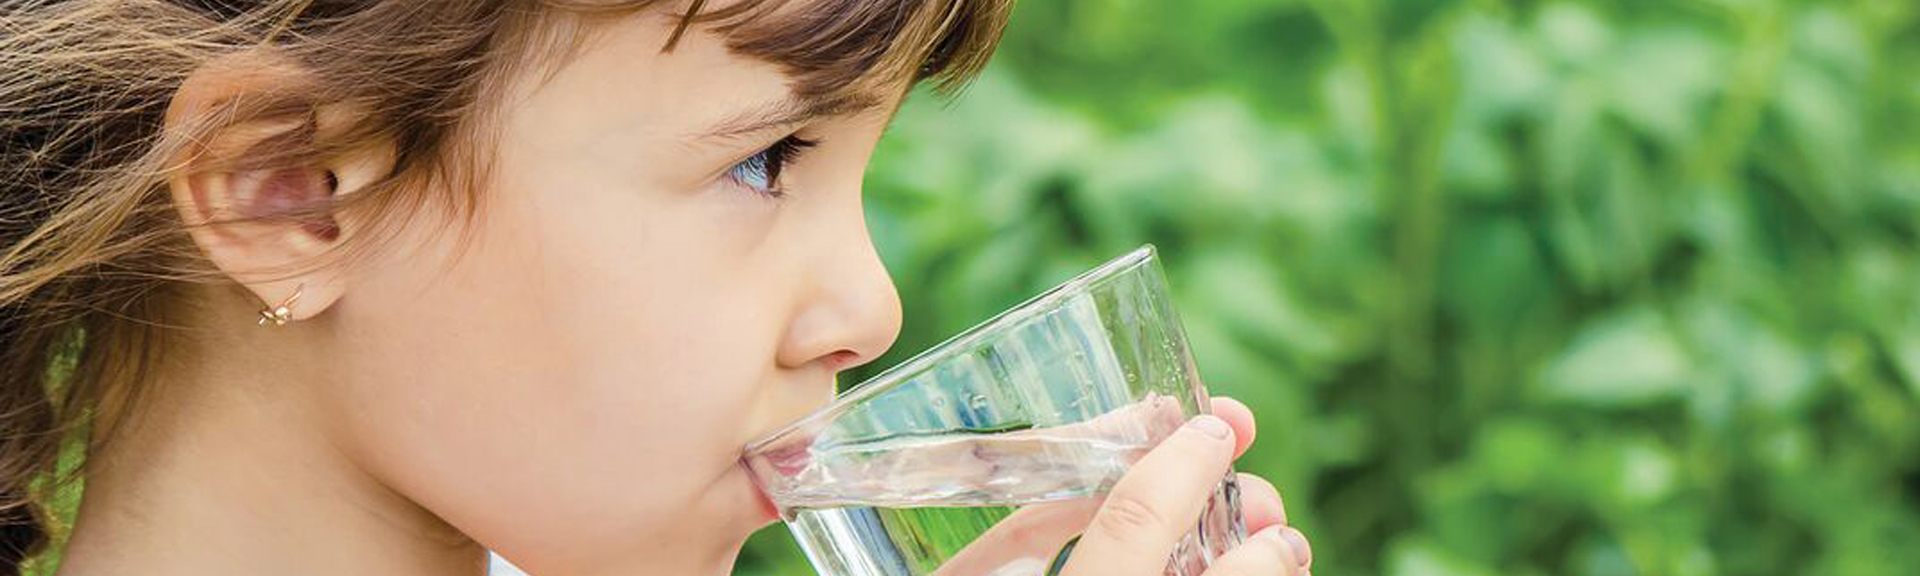 Is Your Tap Water Safe to Drink?